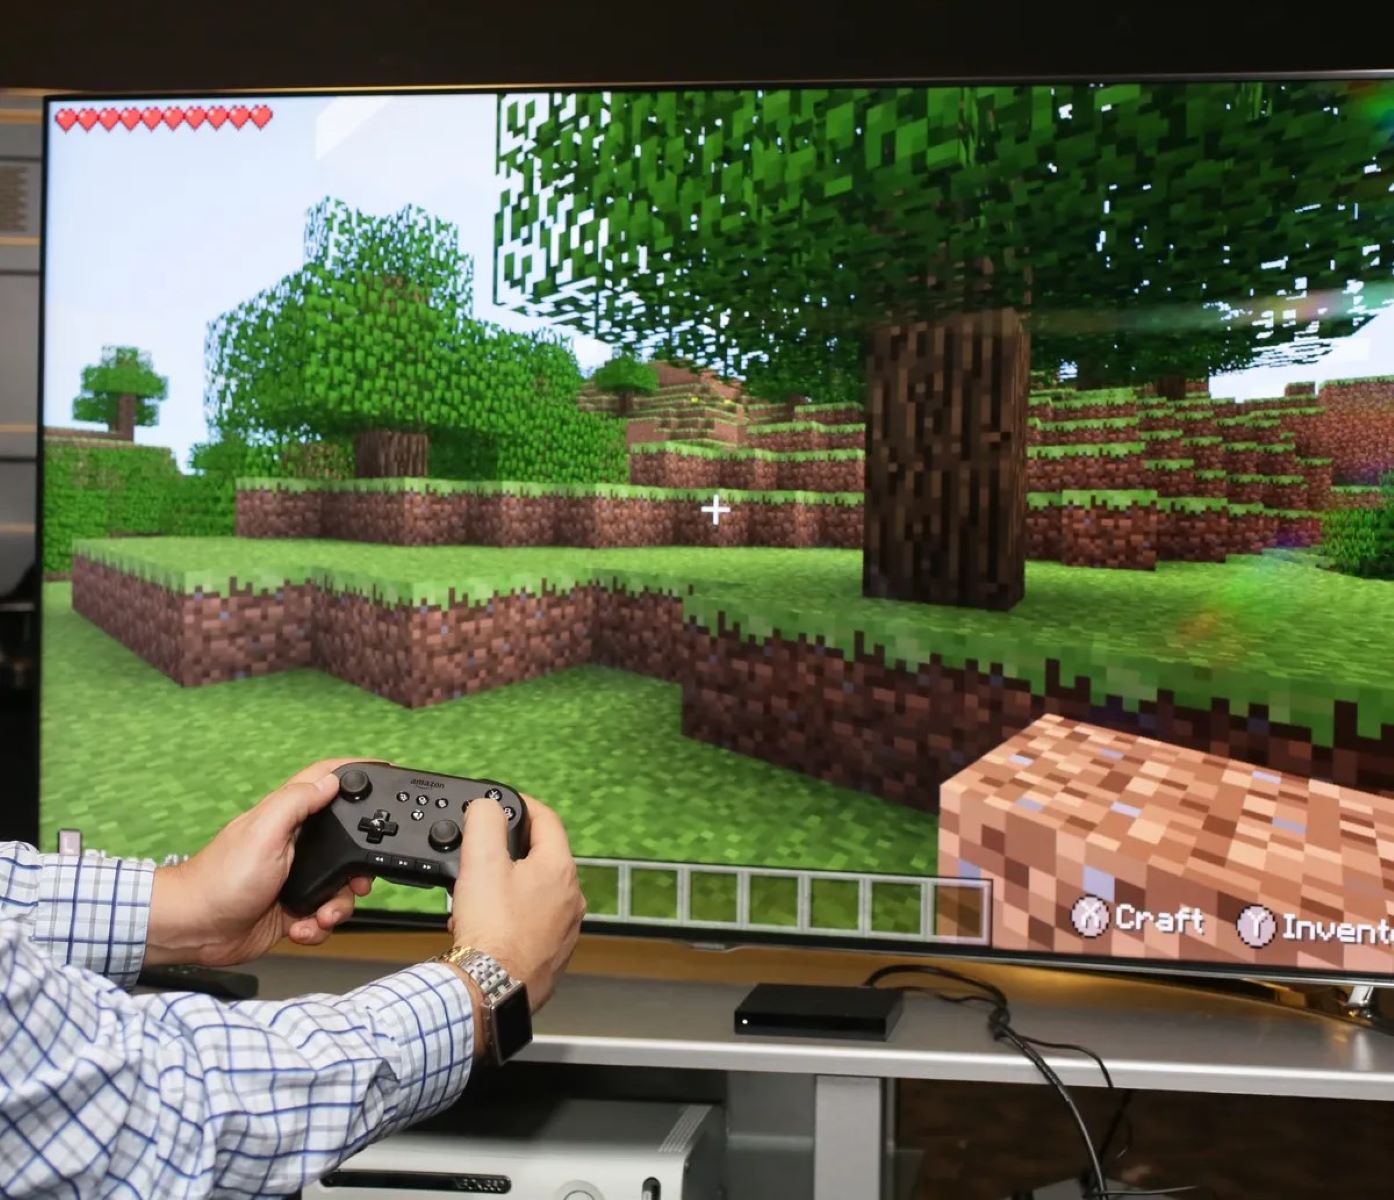 How To Place Blocks In Minecraft With A Game Controller